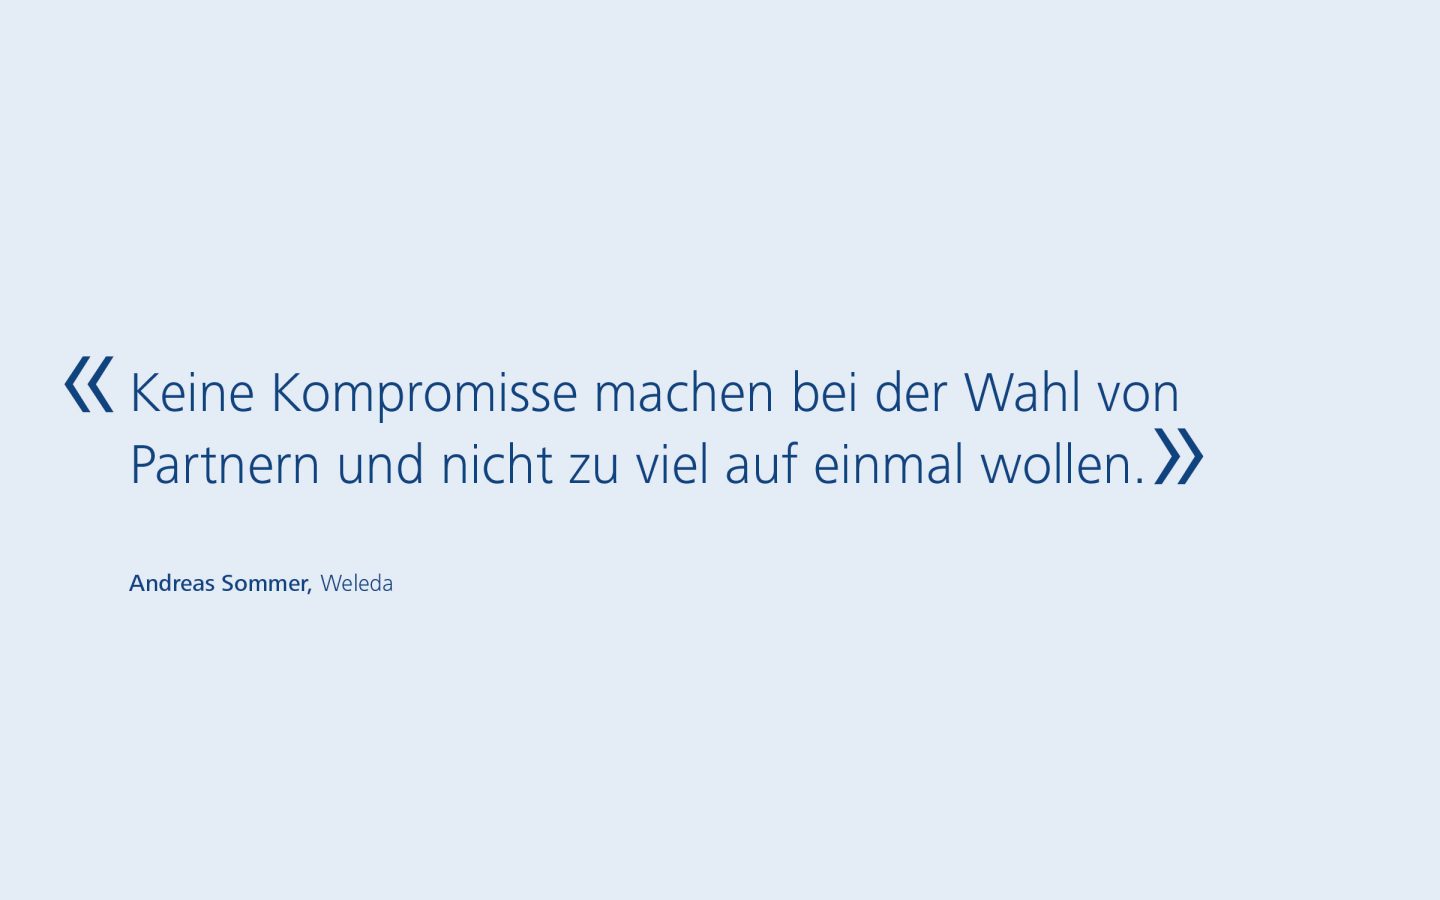 Statement Andreas Sommer, Weleda